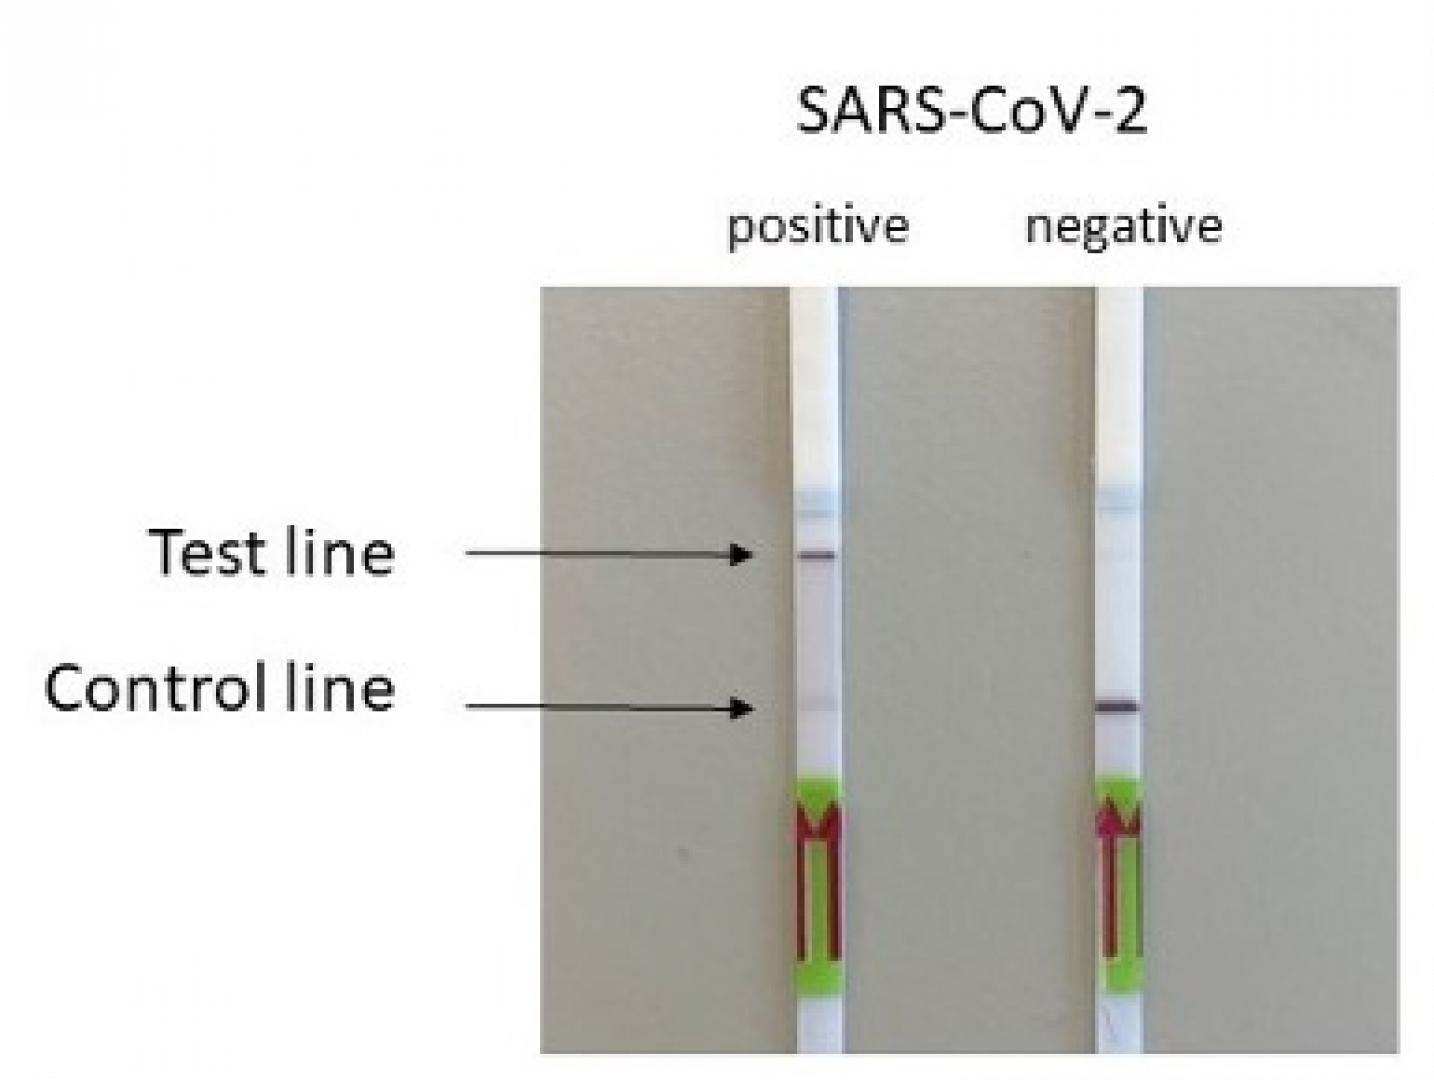 Illustration of the HybridDetect DipStick result obtained for SARS-CoV-2. In a negative sample only the control line is visual. In a positive sample both the control and specifically the test line will become visible. A positive sample can thus result in a Dipstick result that shows 2 lines (control and test line, see illustration) or one line (only the test line).